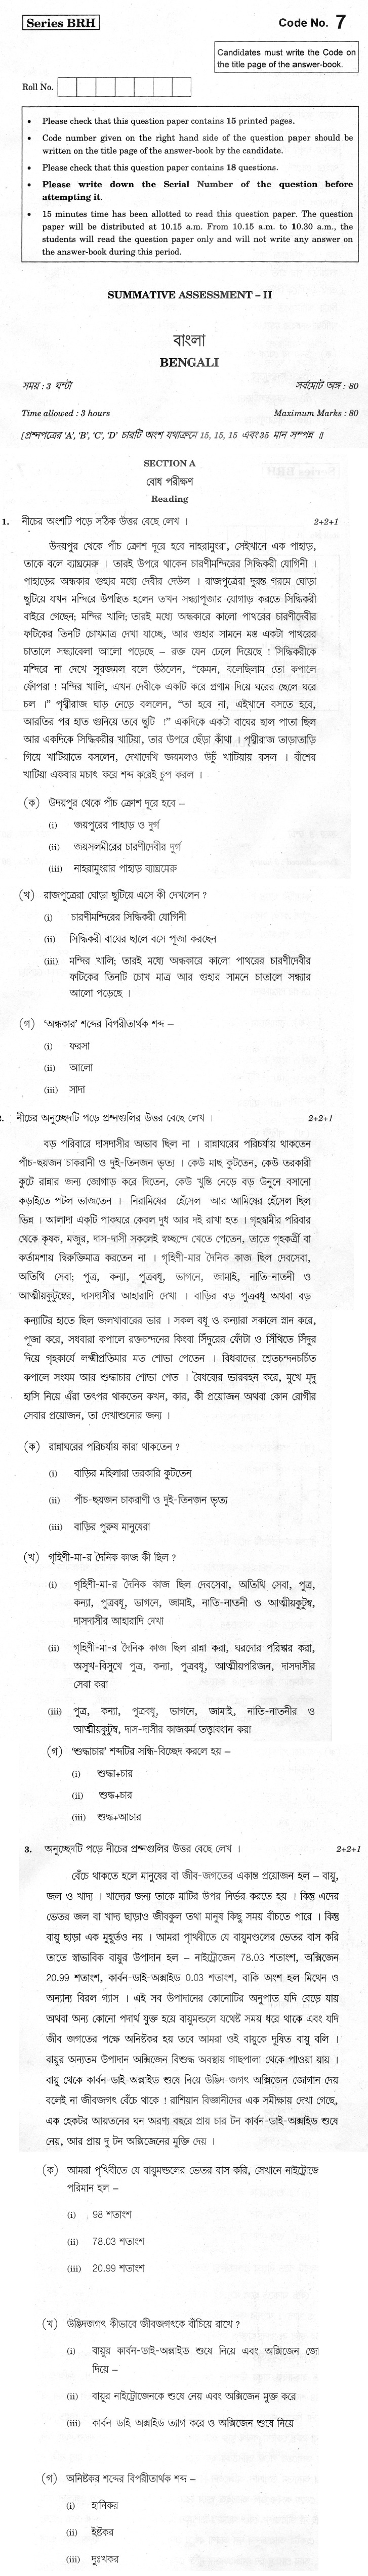 CBSE Class X Previous Year Question Papers 2012 Bengali